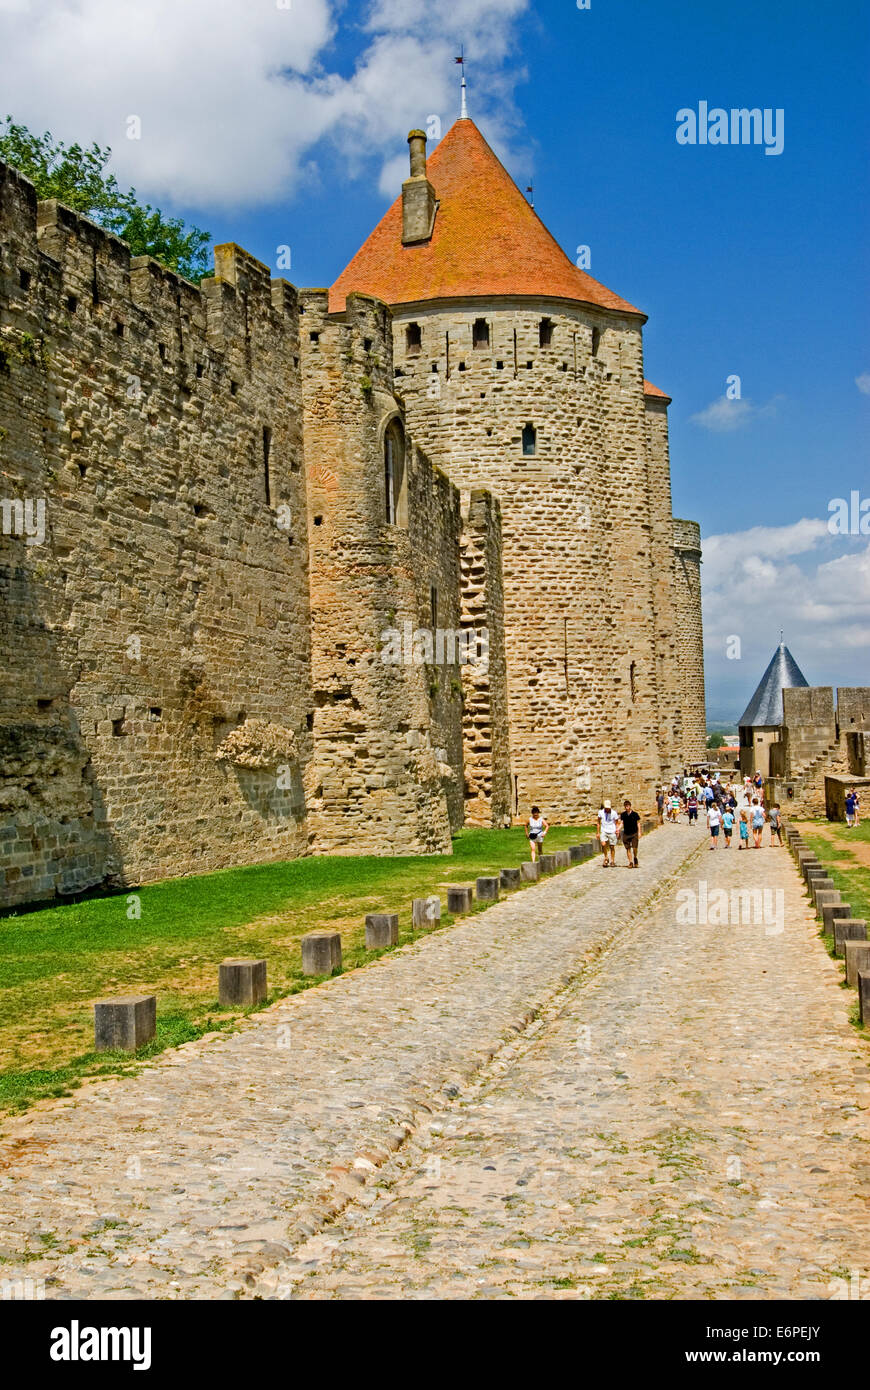 Carcassonne is one of South West France's iconic cities and a UNESCO world heritage site, it's walled city attracting tourists throughout the year. Stock Photo